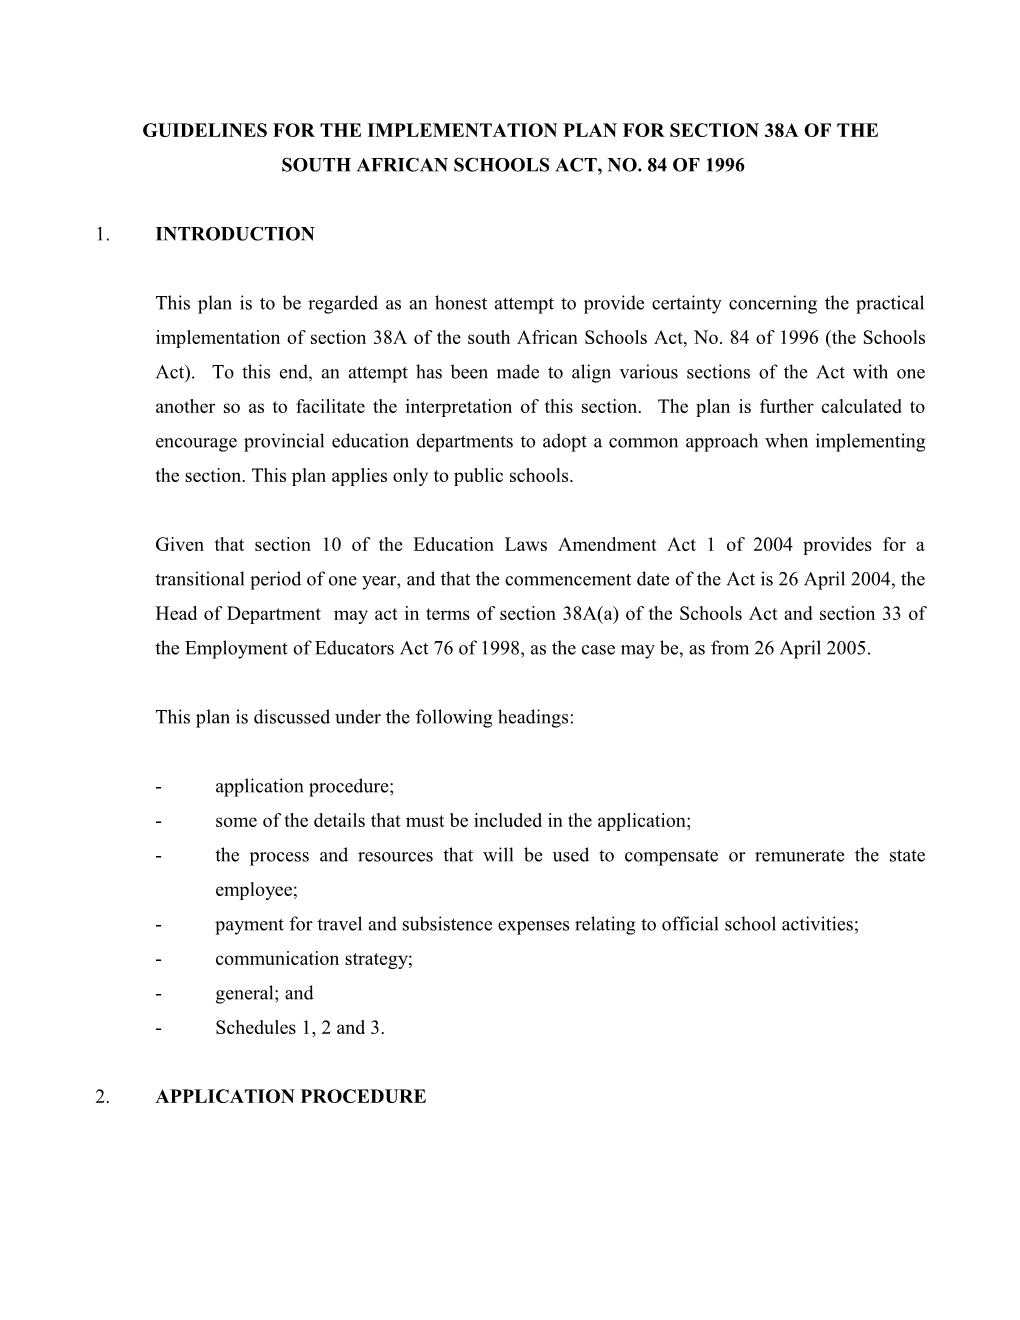 Implementation Plan for Section 38A of the South African Schools Act, No